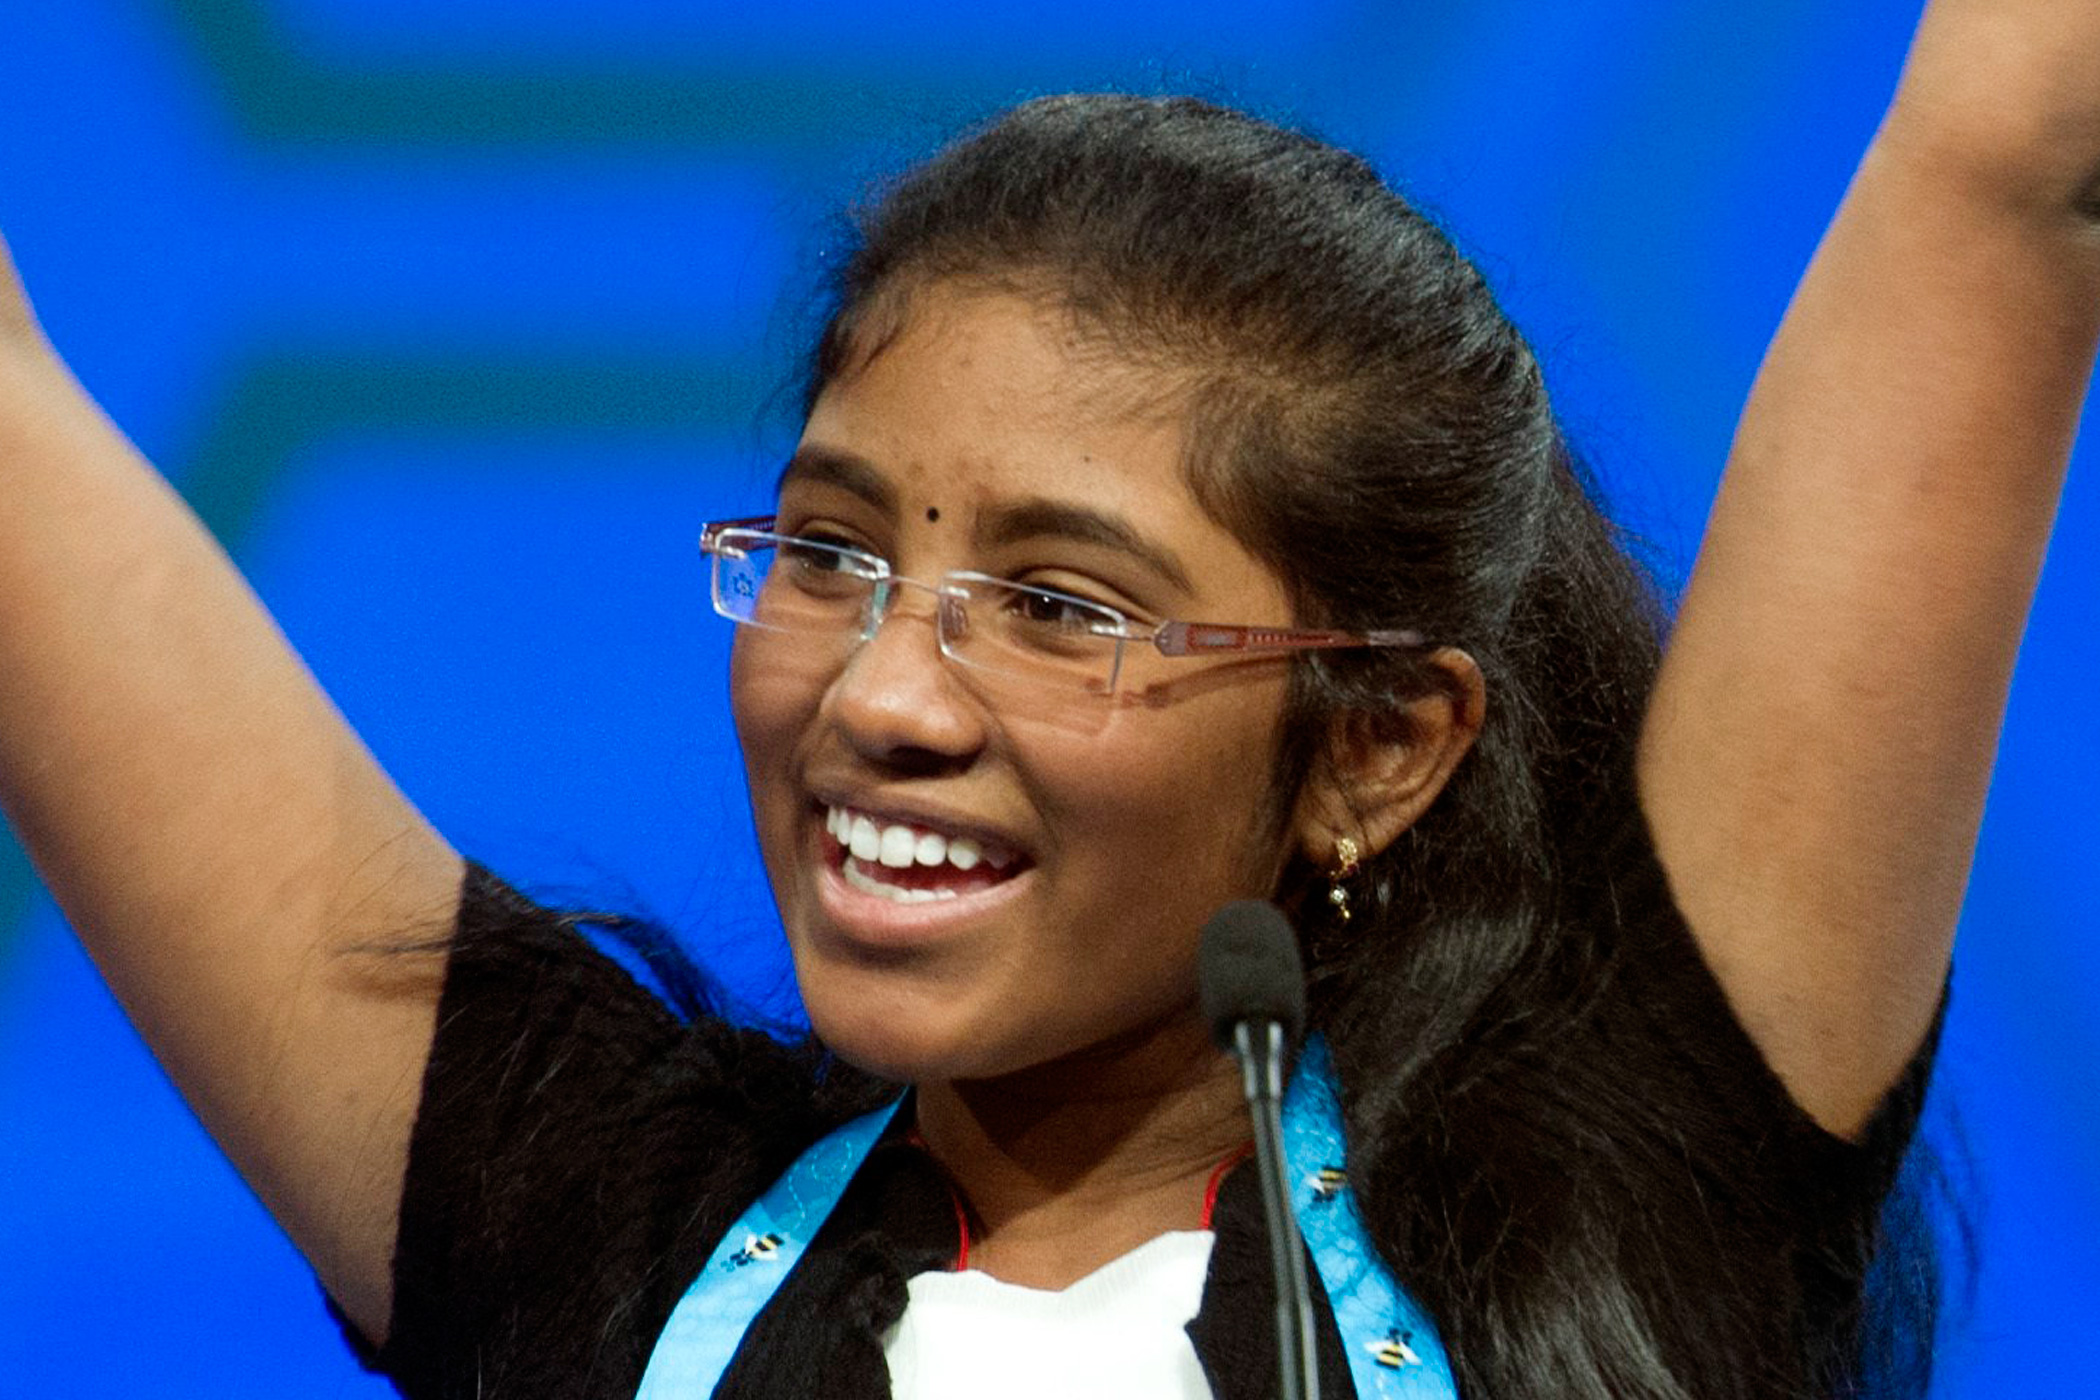 Asritha Sure, 13, of Morgantown, W. Va. celebrates correctly spelling her word during a preliminary round of the Scripps National Spelling Bee in National Harbor, Md., May 25, 2016.